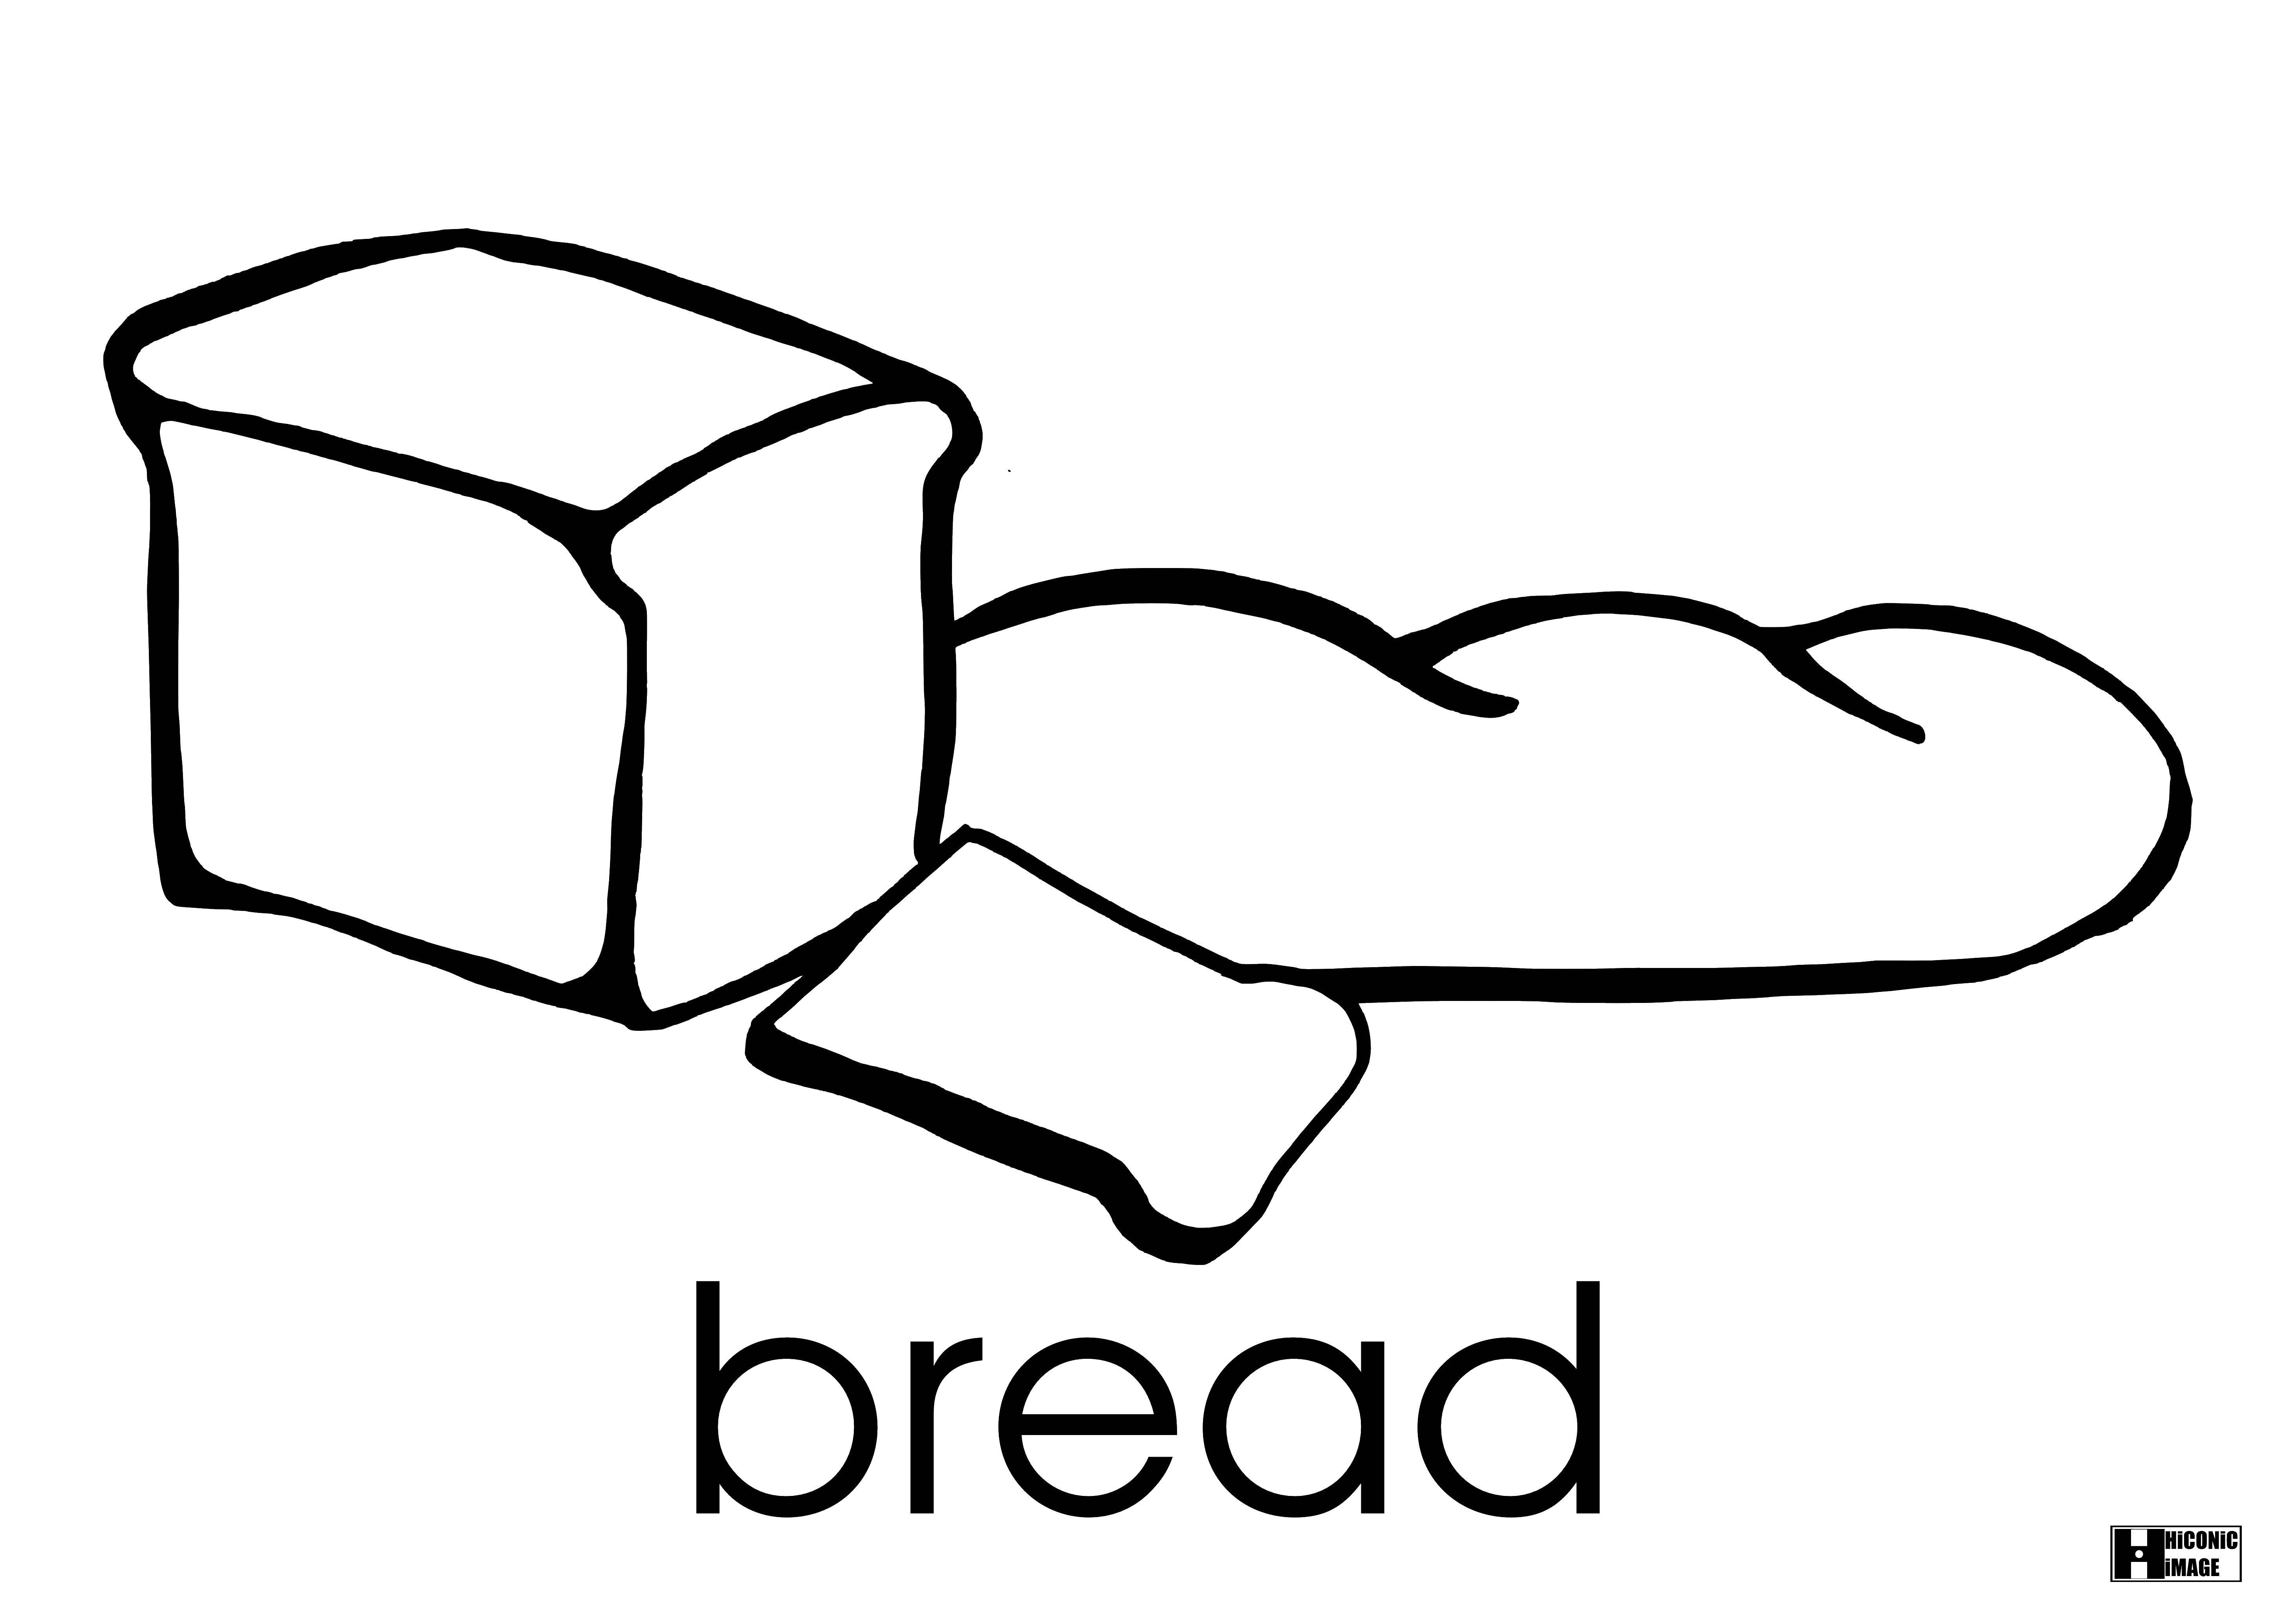 Coloring Loaf of bread. Category bread. Tags:  bread, loaf.